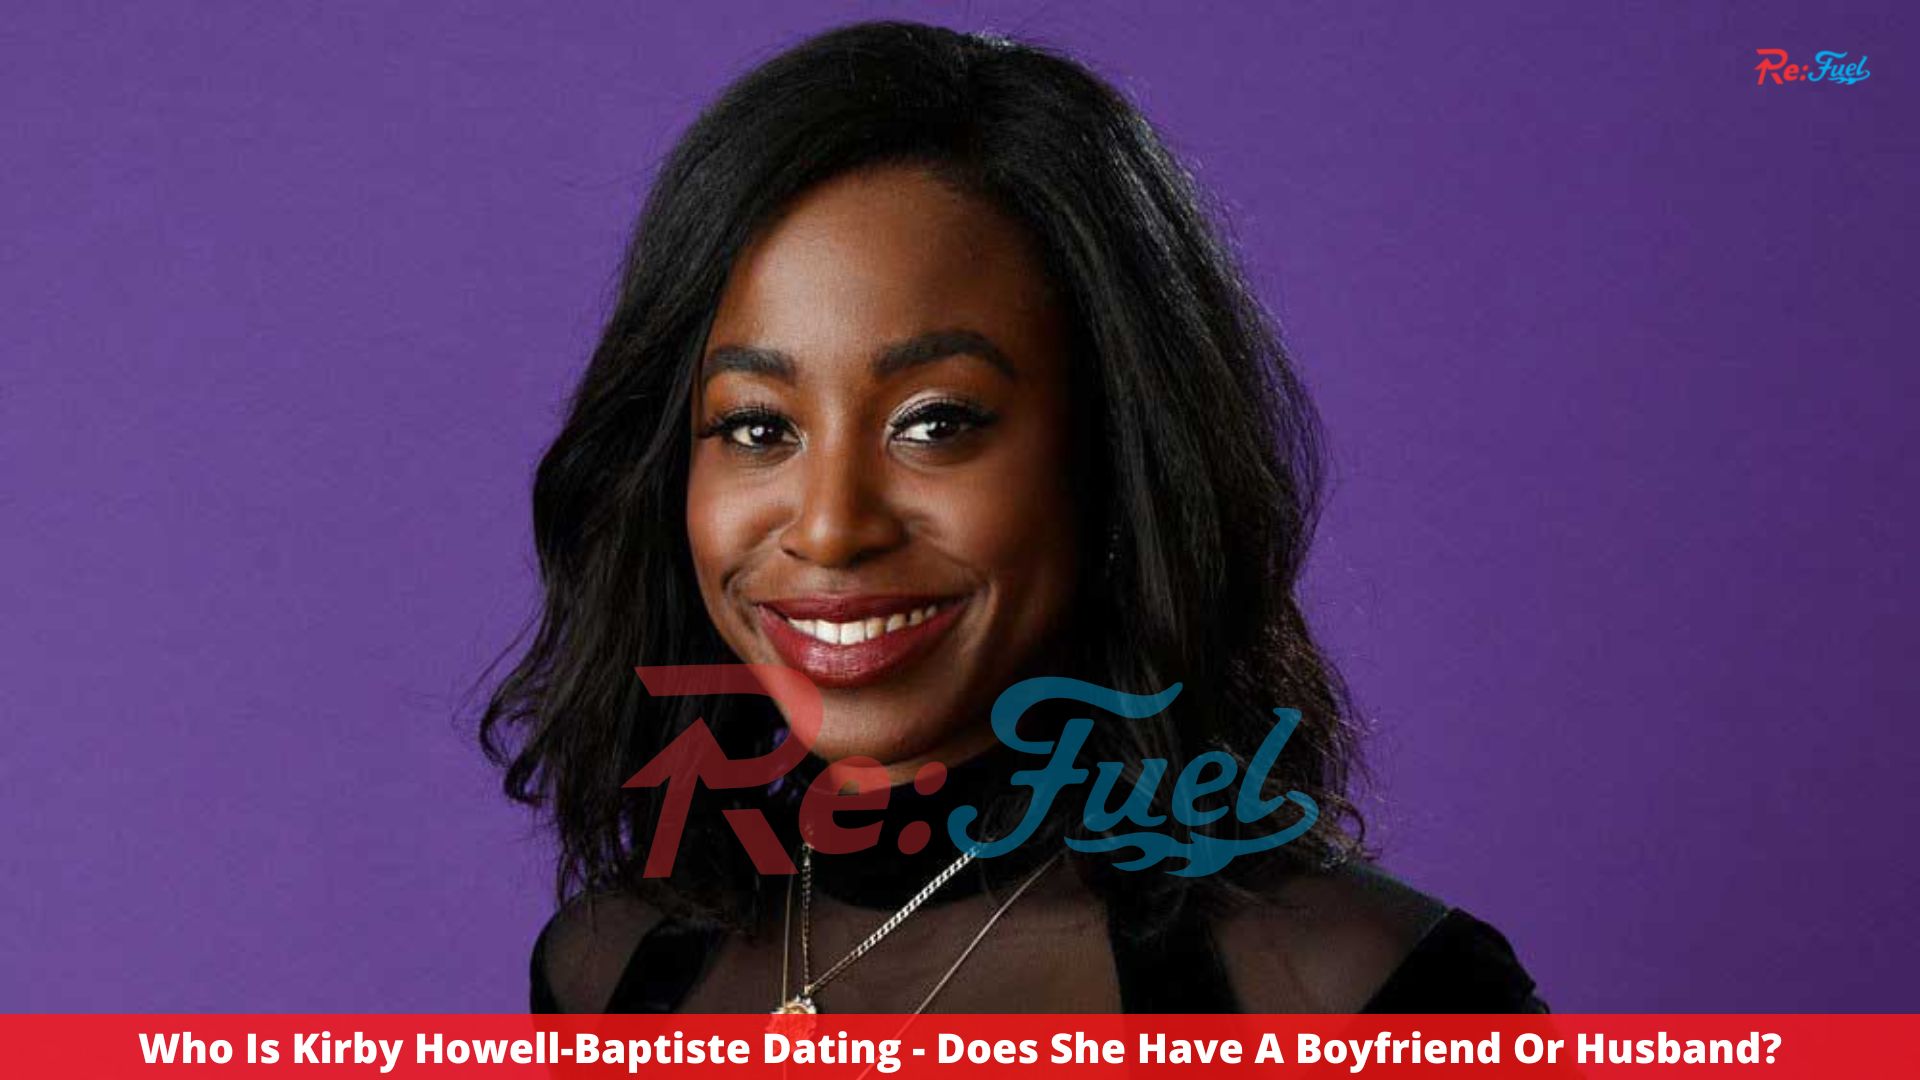 Who Is Kirby Howell-Baptiste Dating - Does She Have A Boyfriend Or Husband?